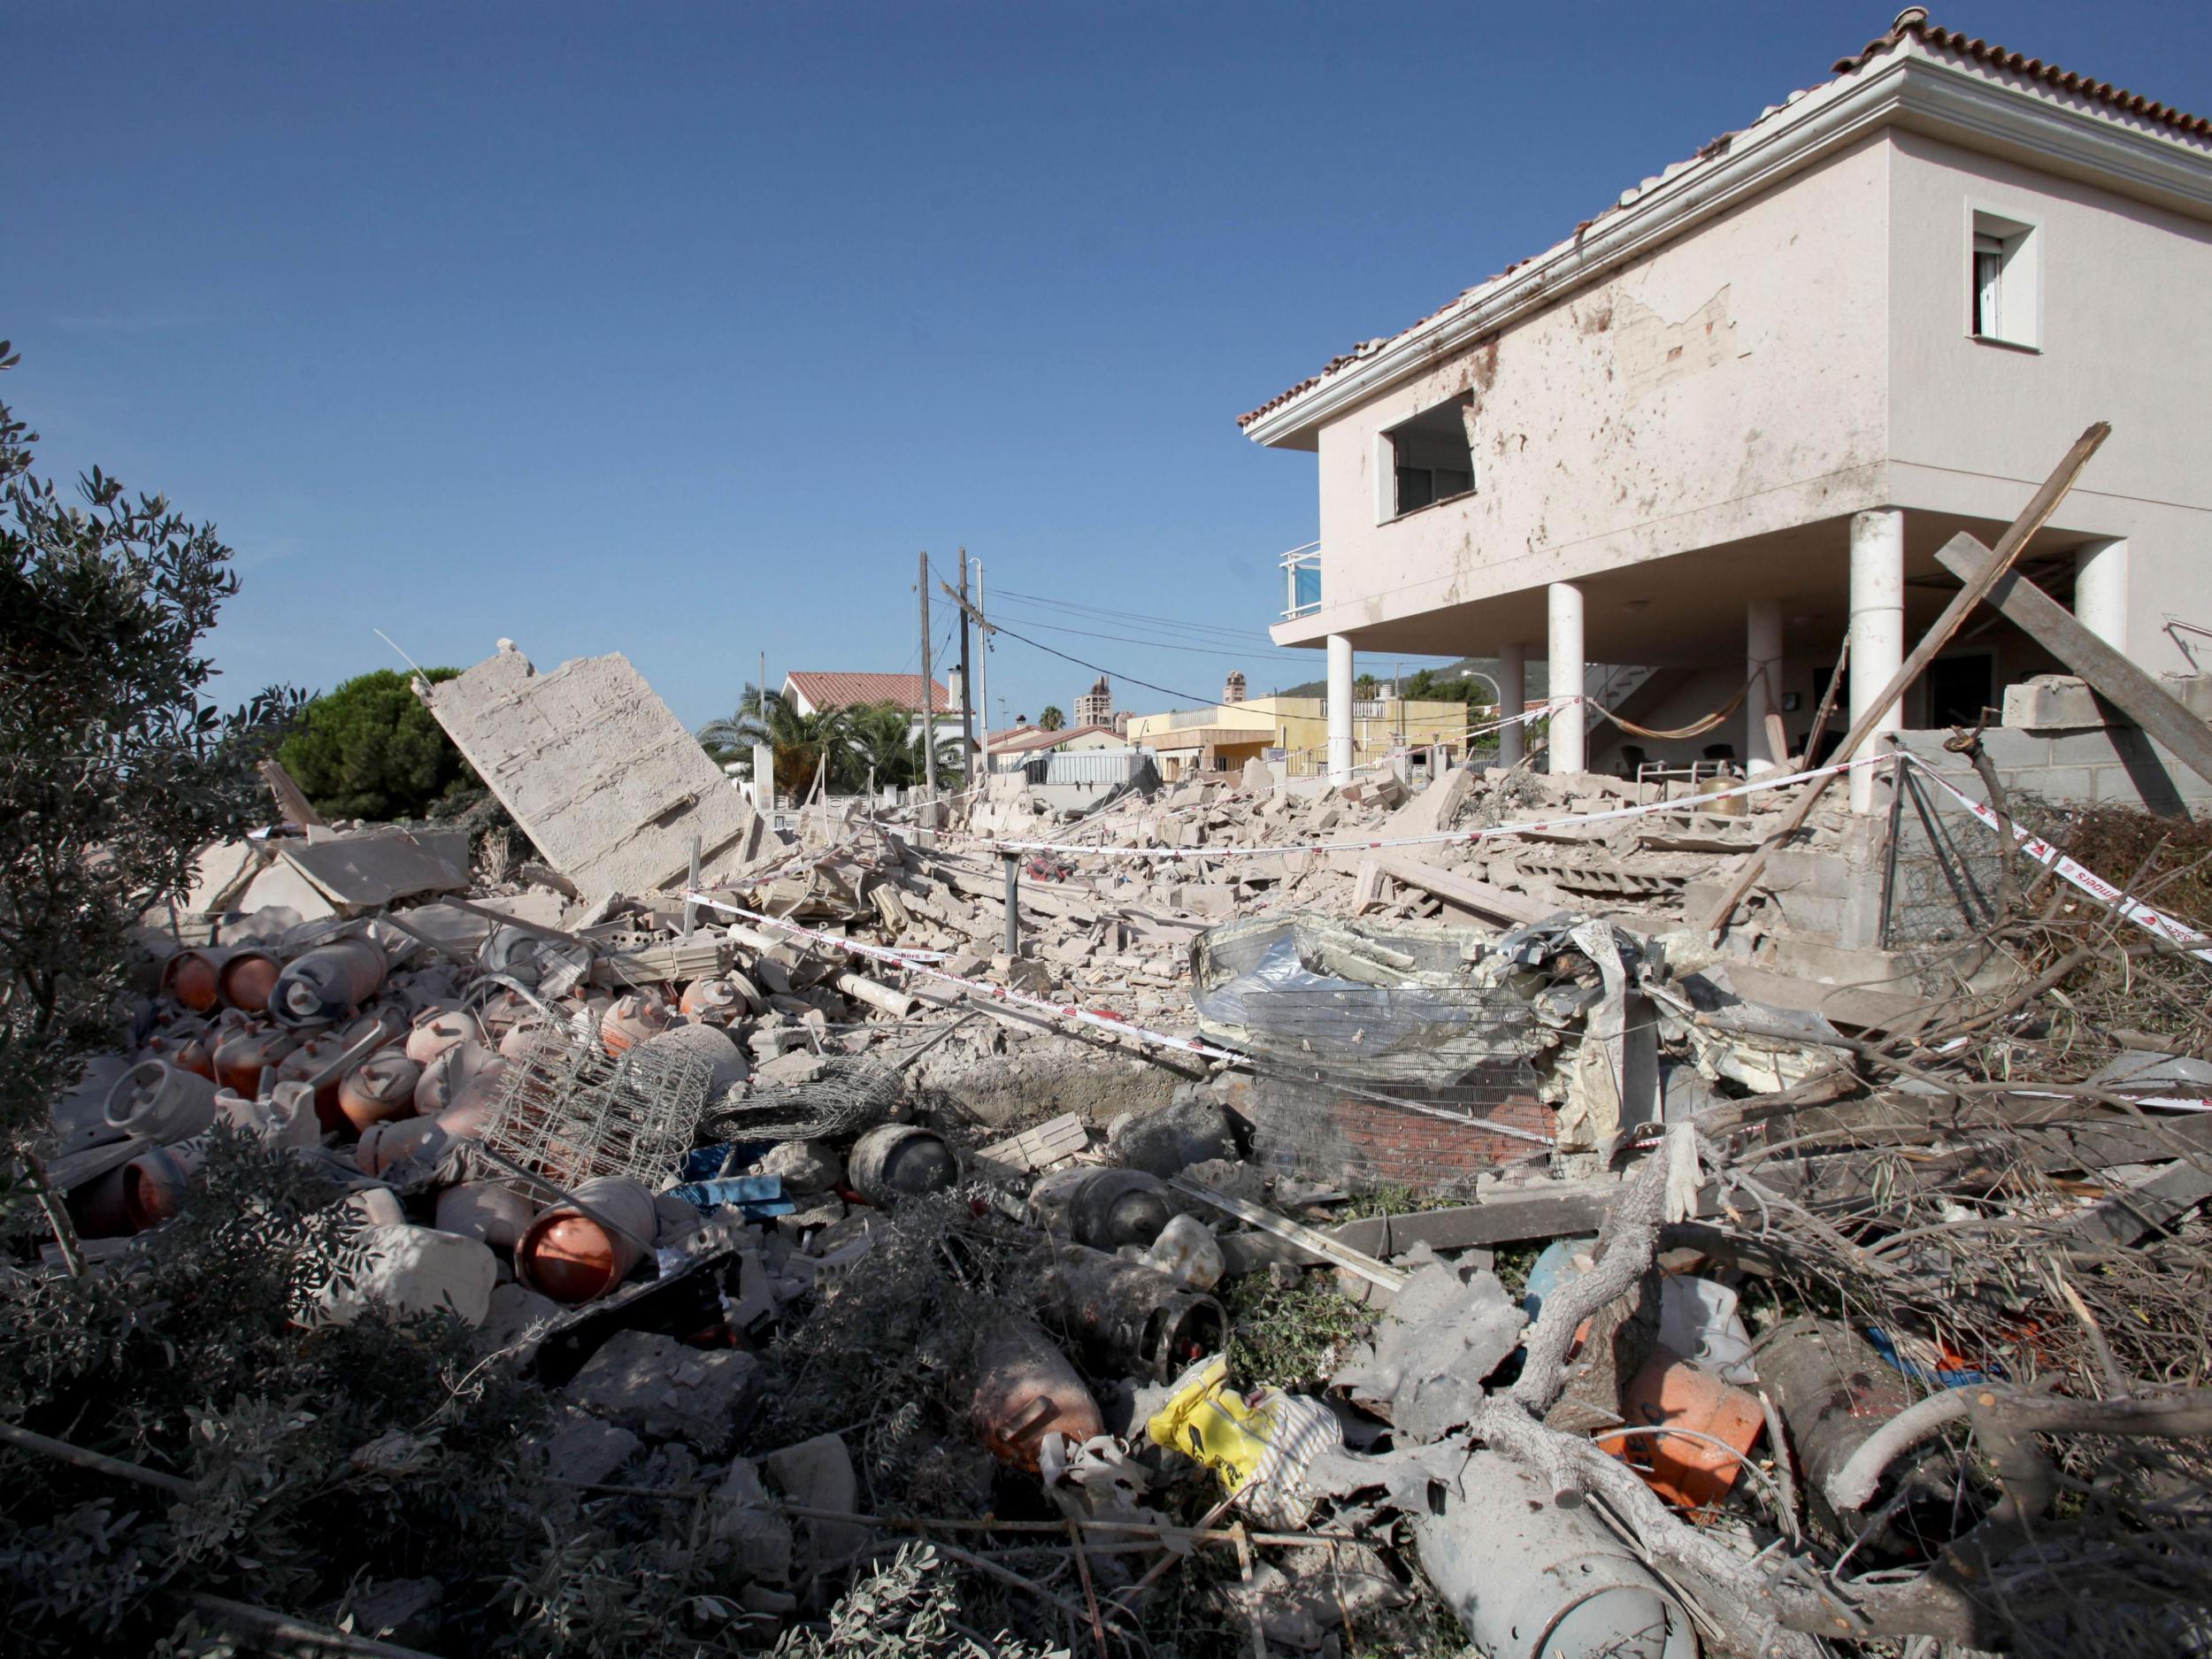 An Isis cell in Spain destroyed their hideout in an accidental explosion involving TATP and gas canisters